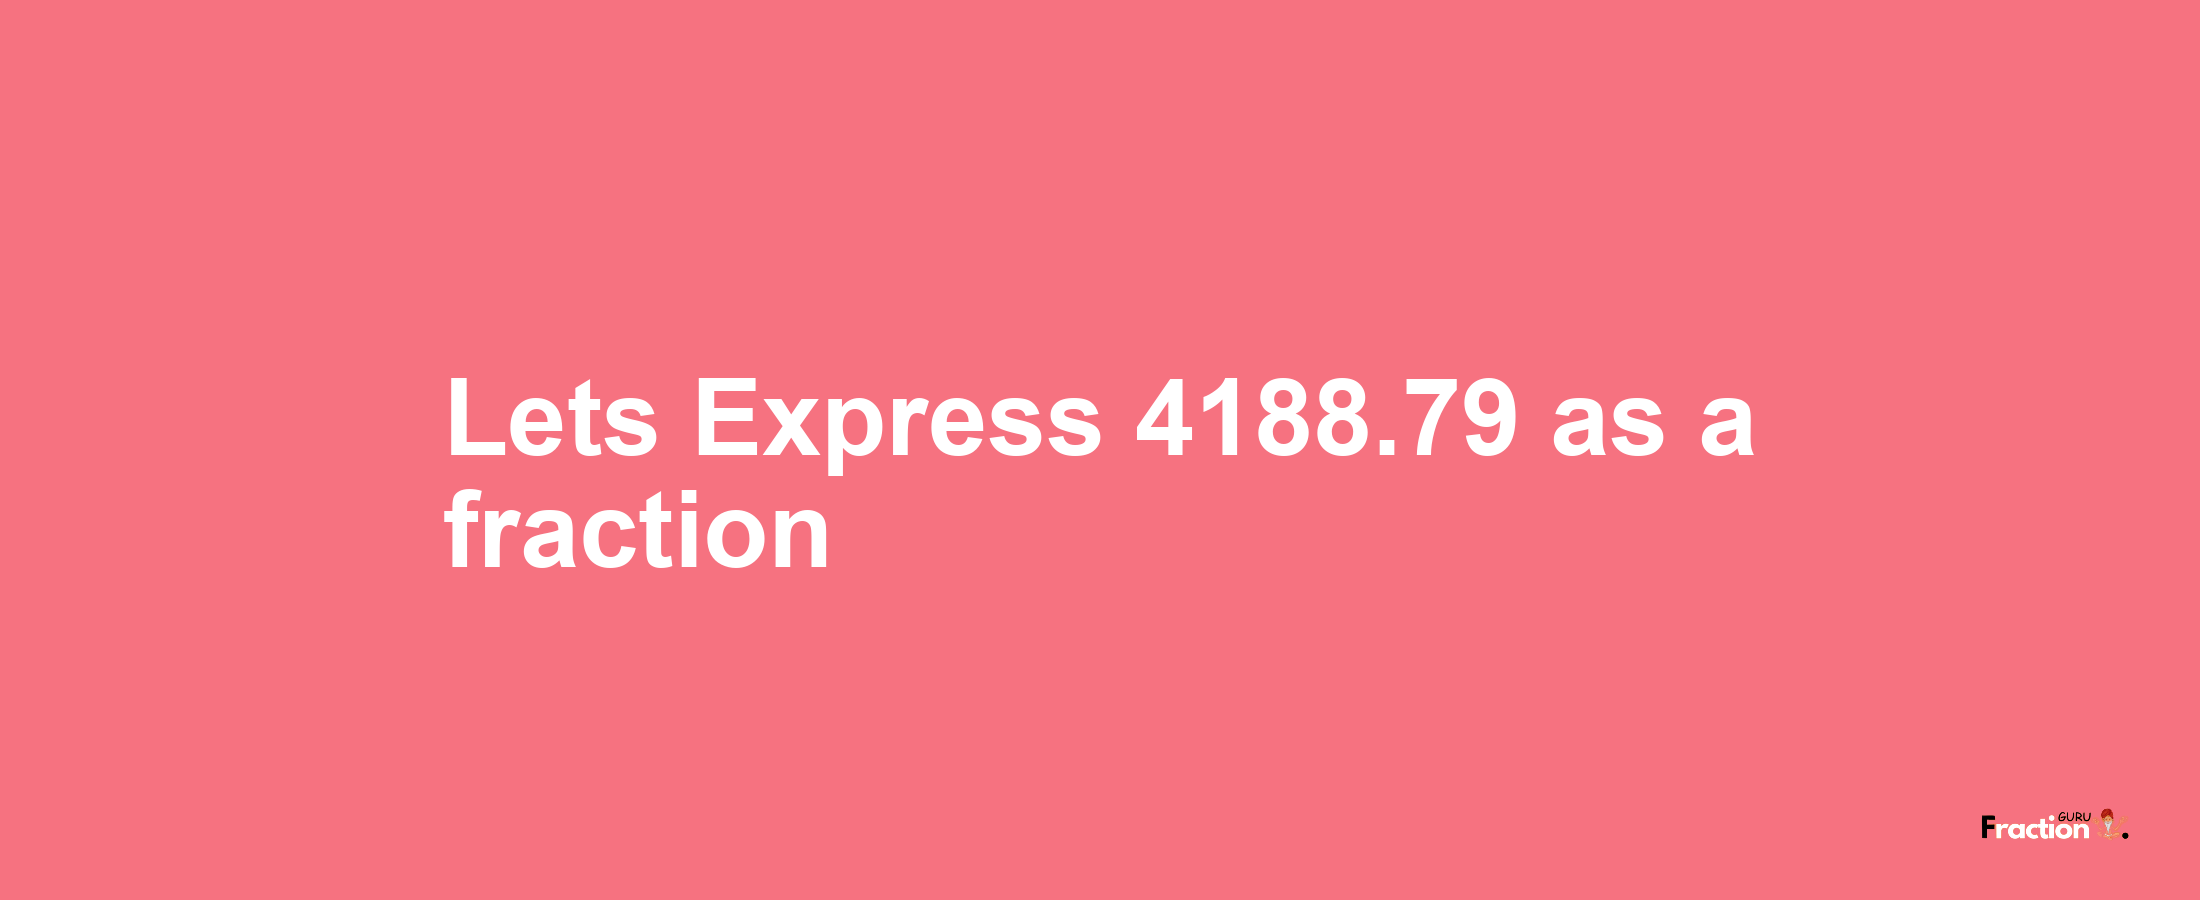 Lets Express 4188.79 as afraction